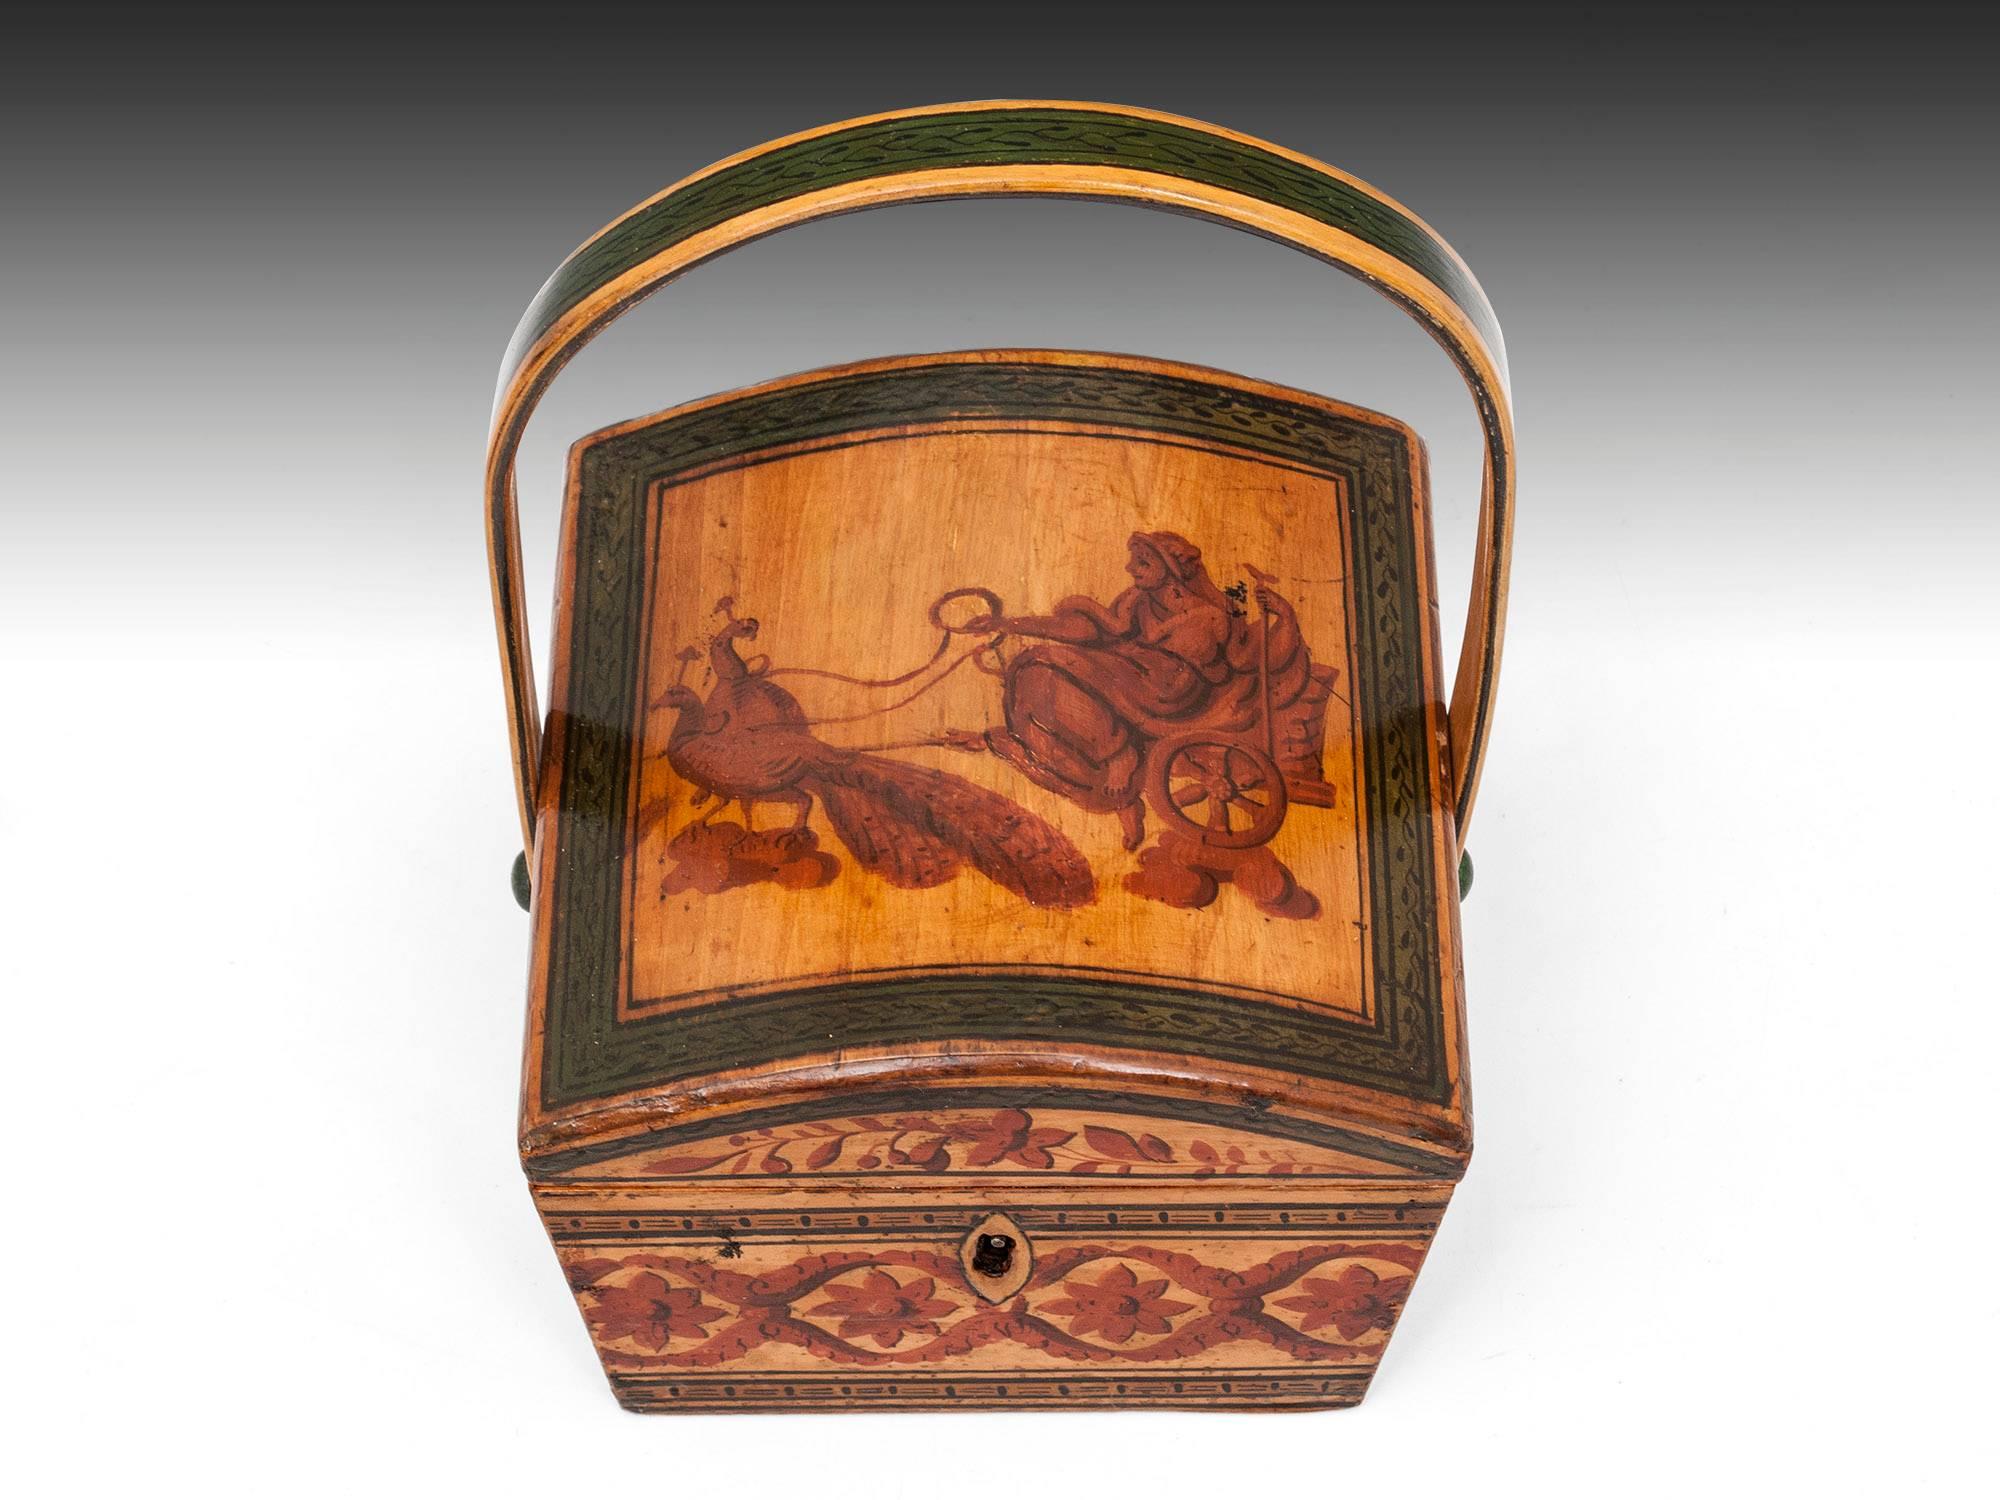 Early antique tunbridge sewing basket decorated with floral patterns with bold lines of black and green. The top is decorated with an image of the Greek Queen of the Gods, Hera. The Goddess of Marriage, Women, Childbirth and Family, depicted on her